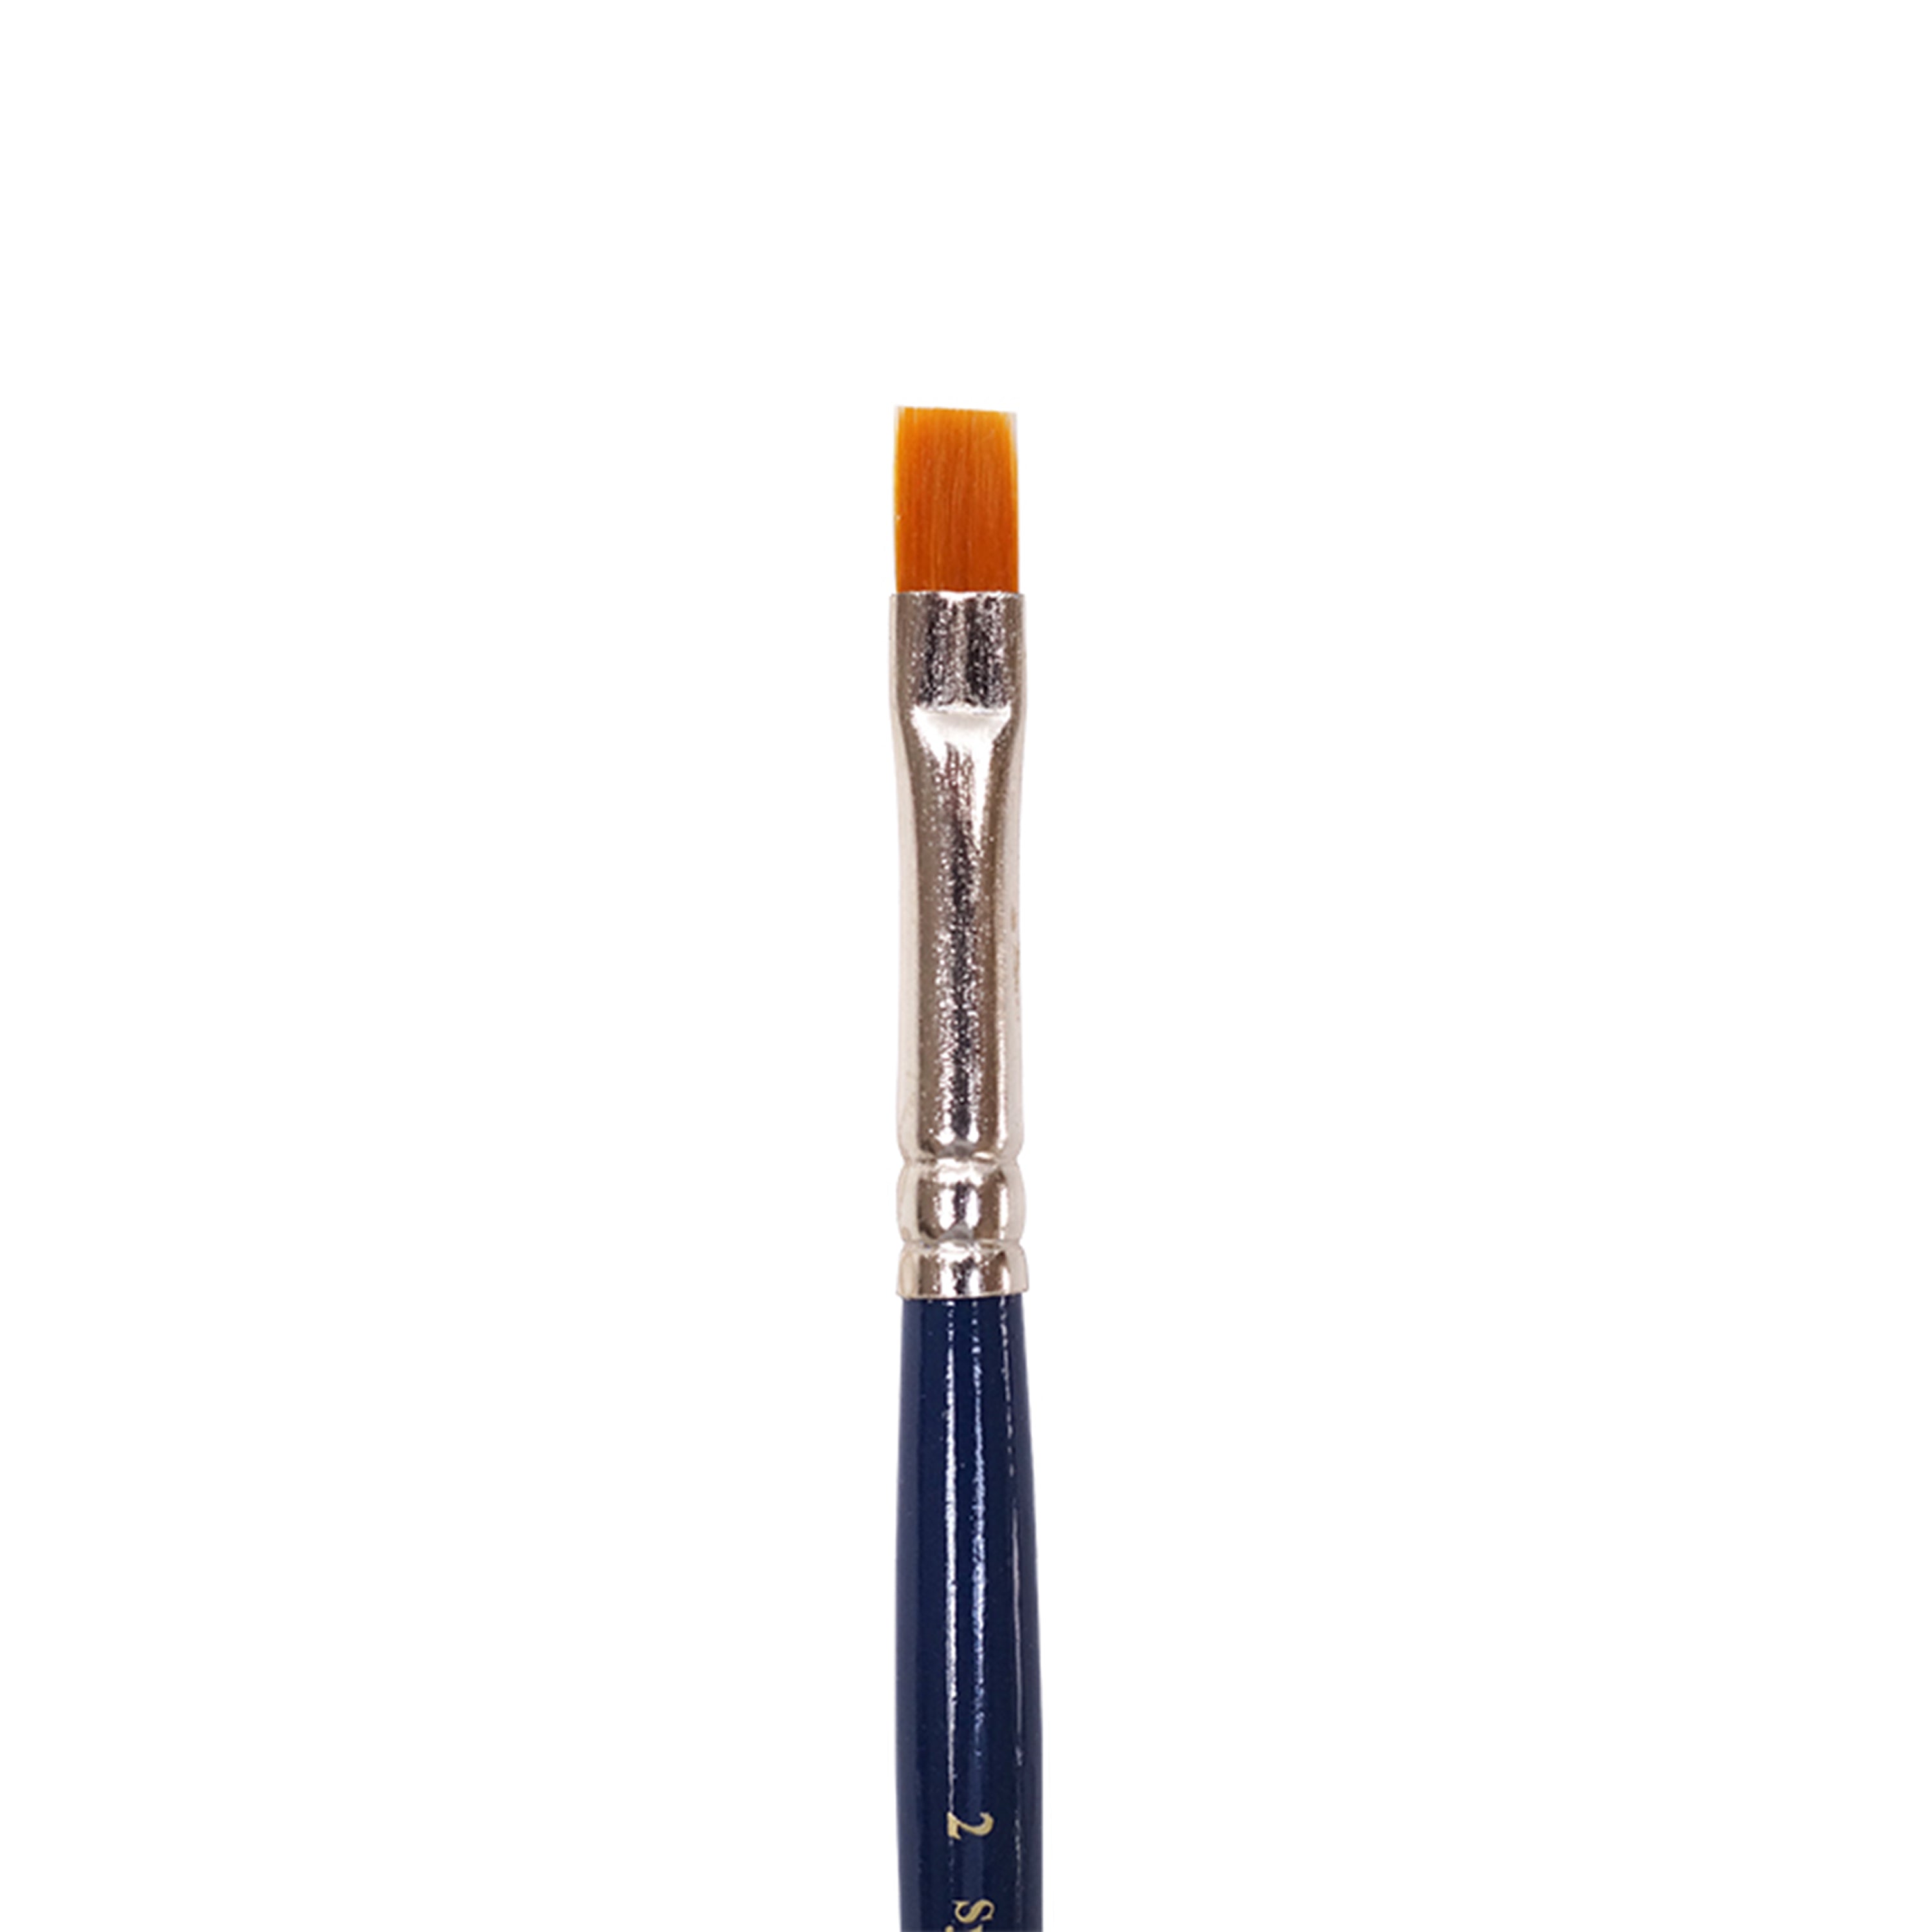 Faber Castell Paint Brush - Synthetic Hair Flat Size 2, 1pc